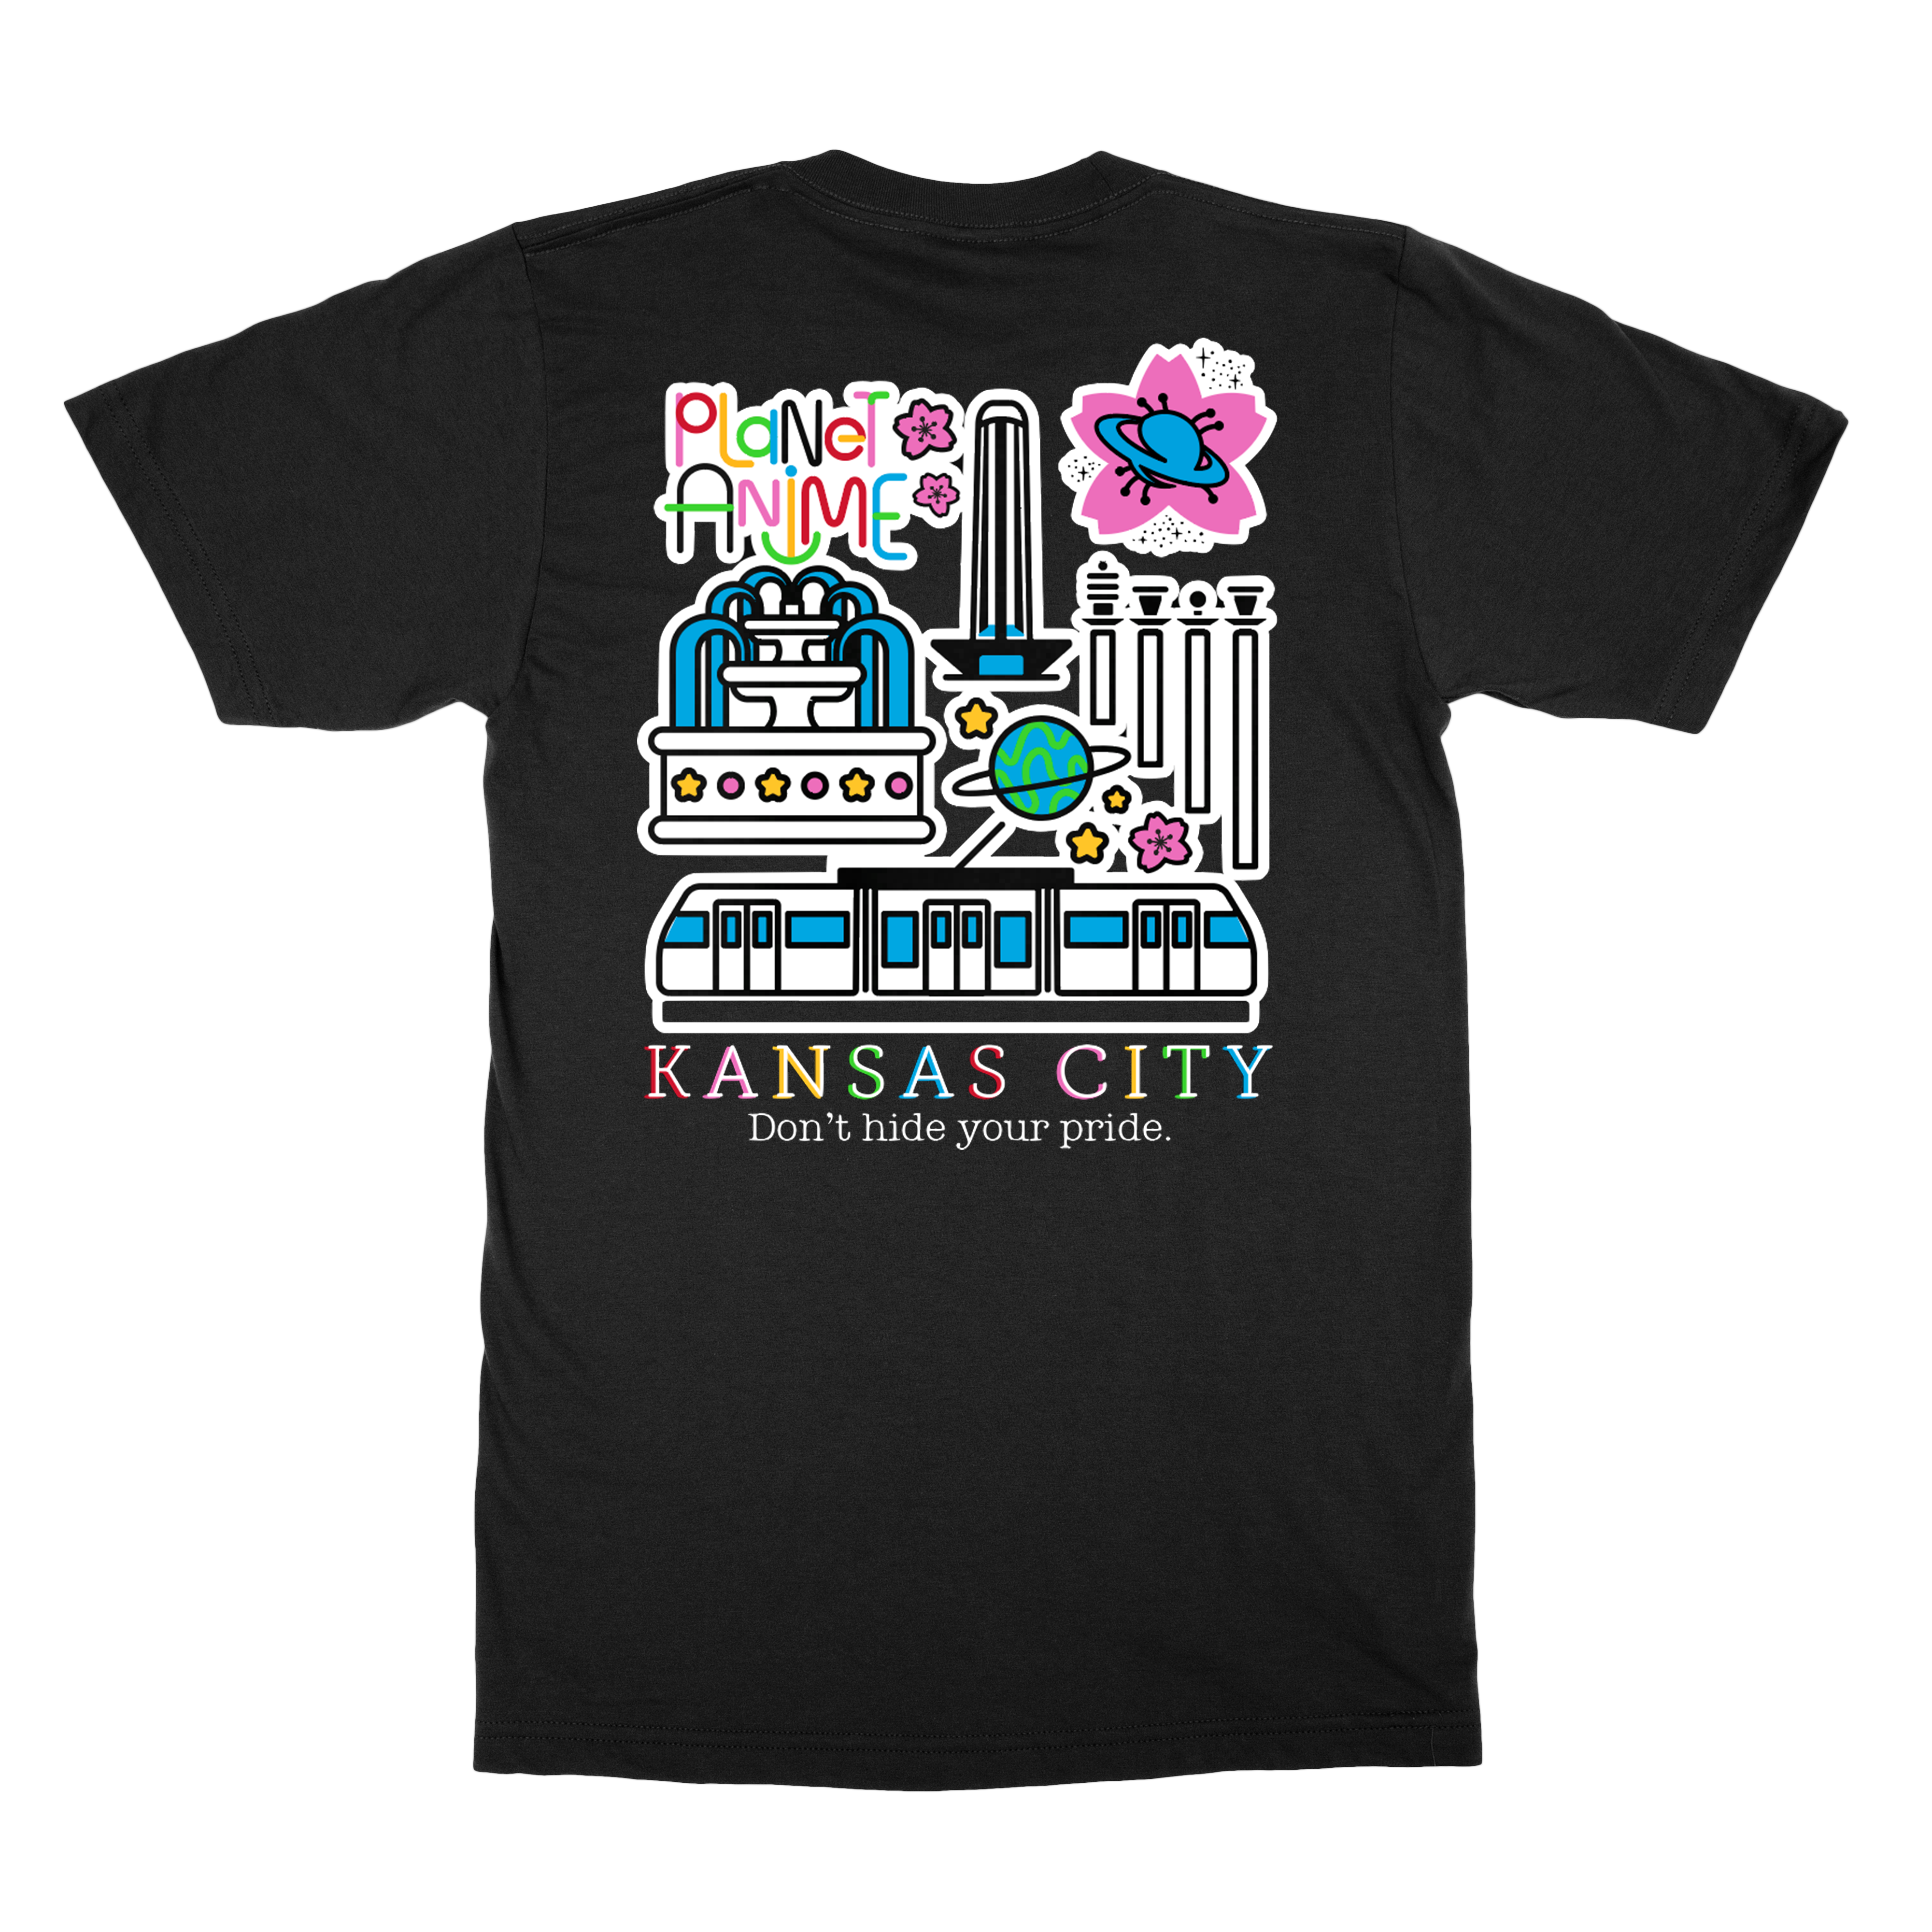 Planet Anime | Don't Hide Your Pride T-Shirt